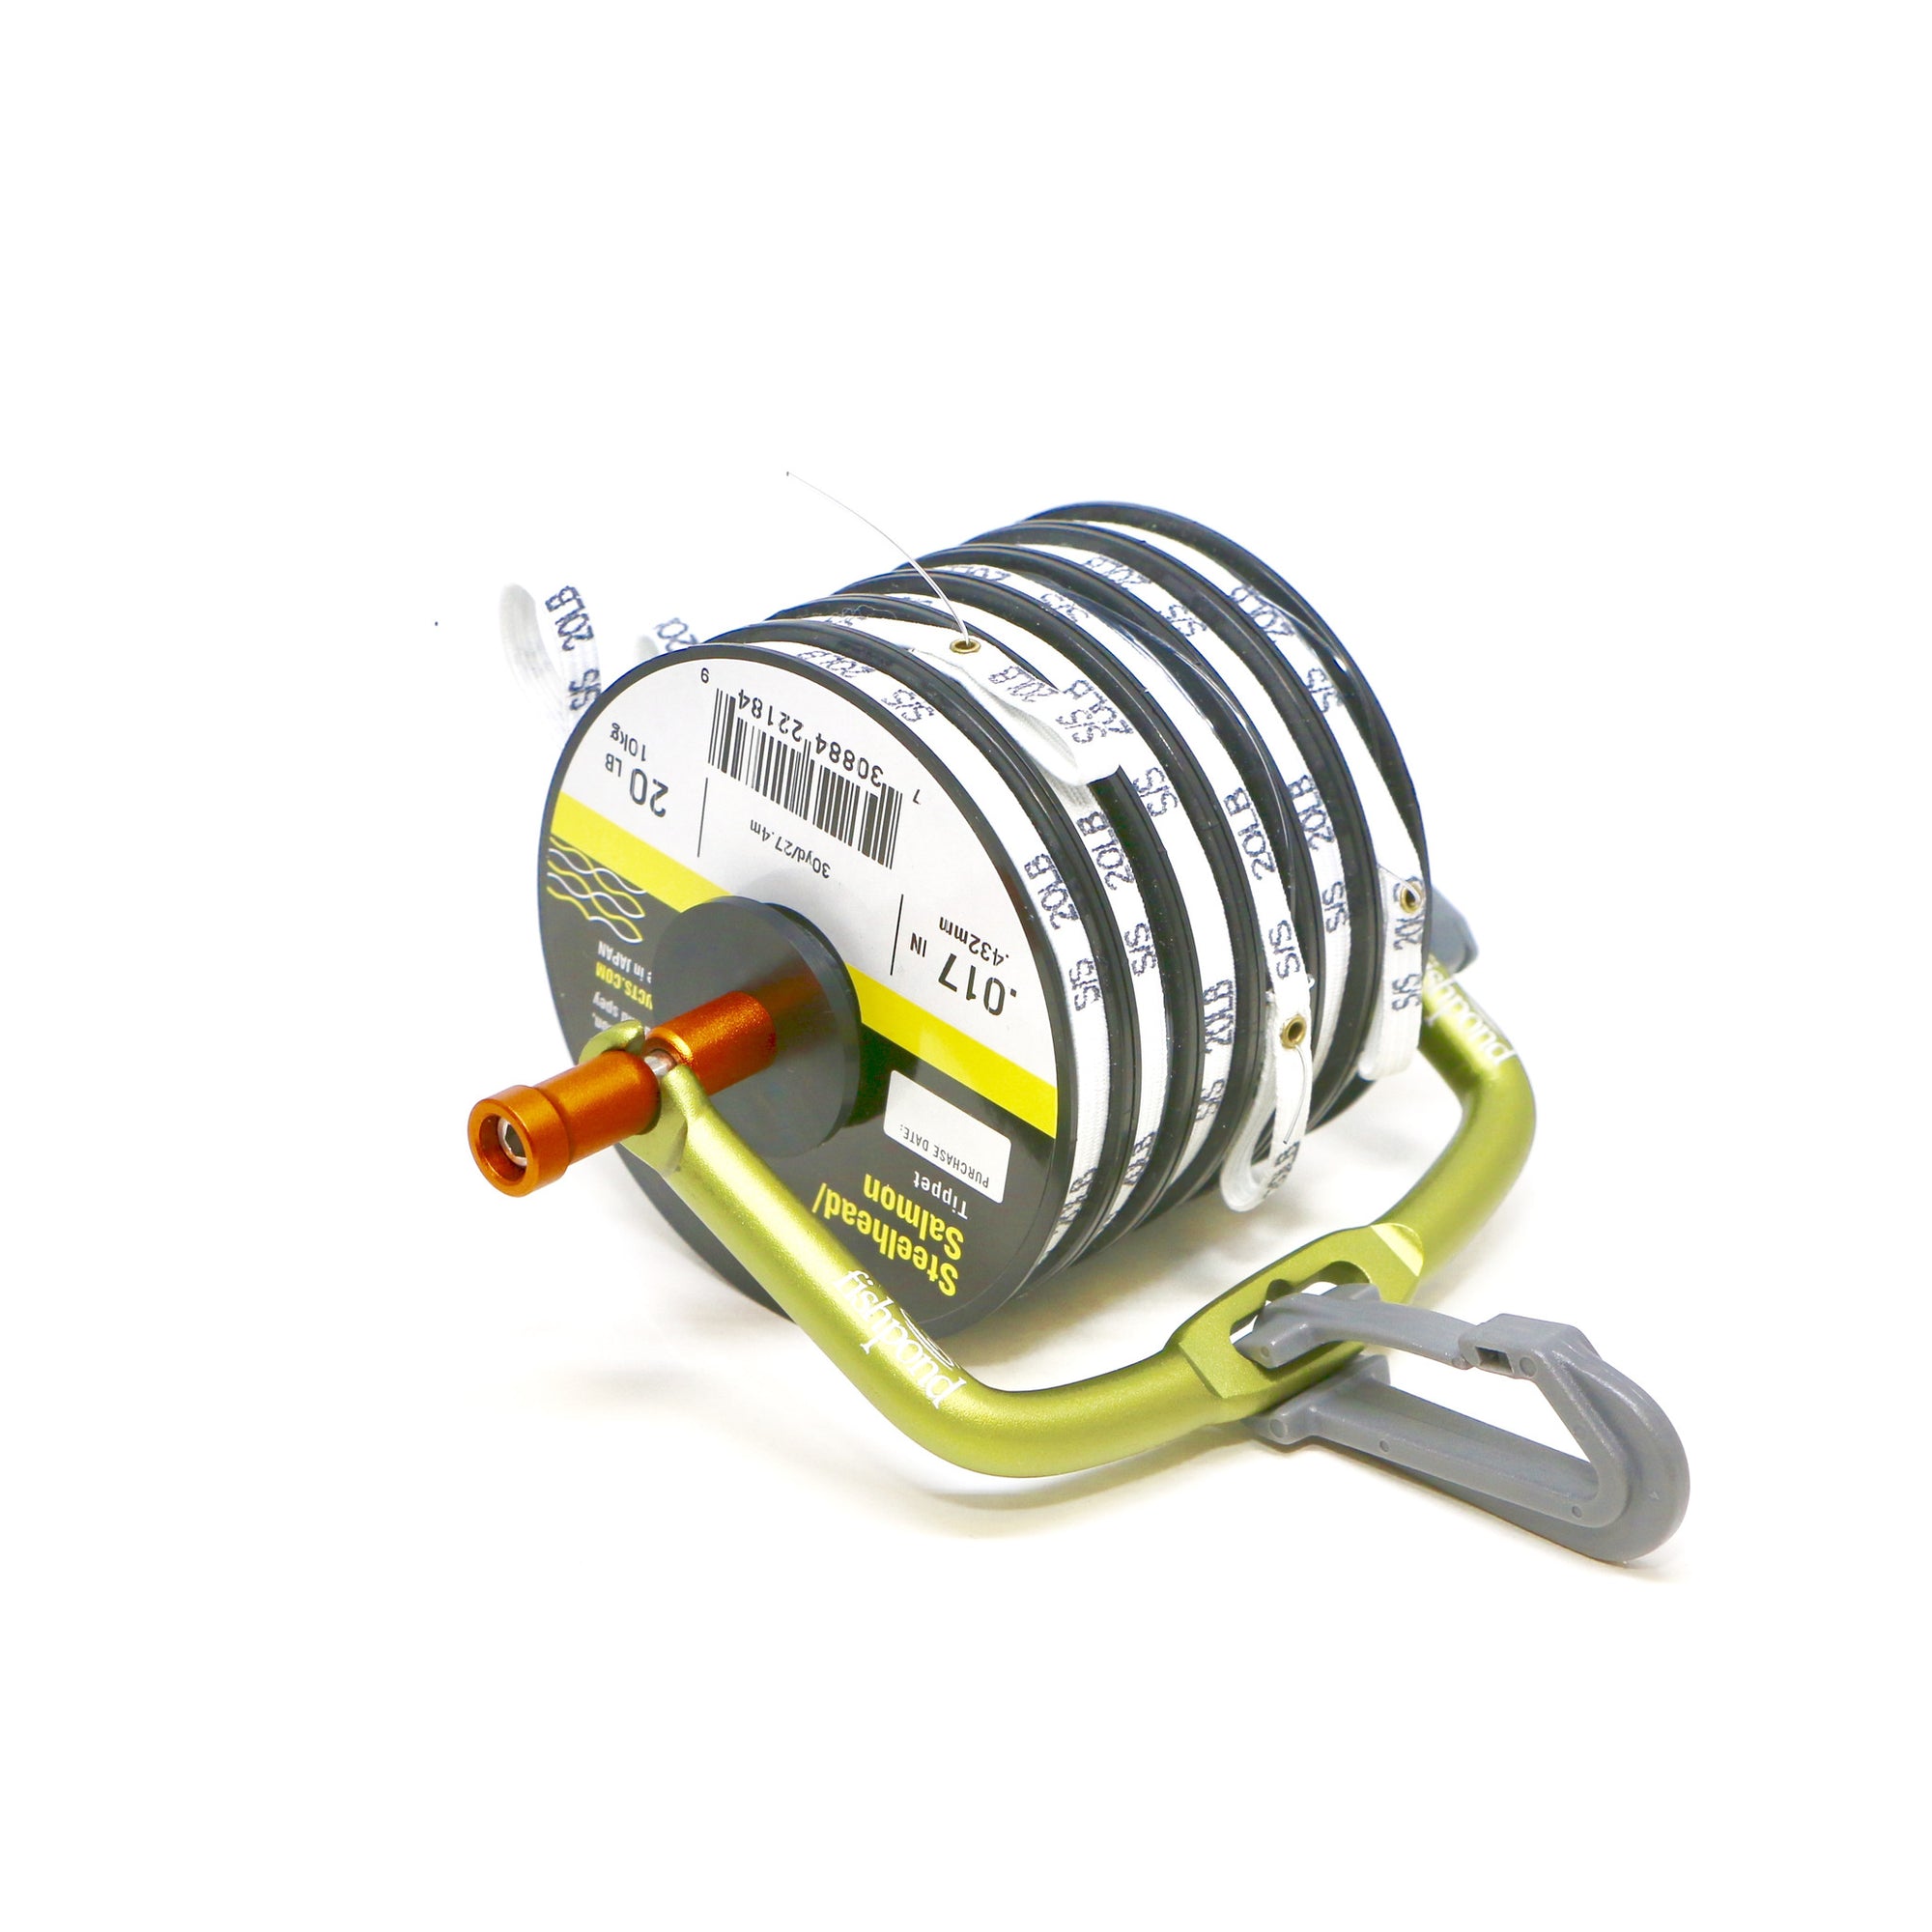 Fishpond Headgate Tippet Holder - Iron Bow Fly Shop